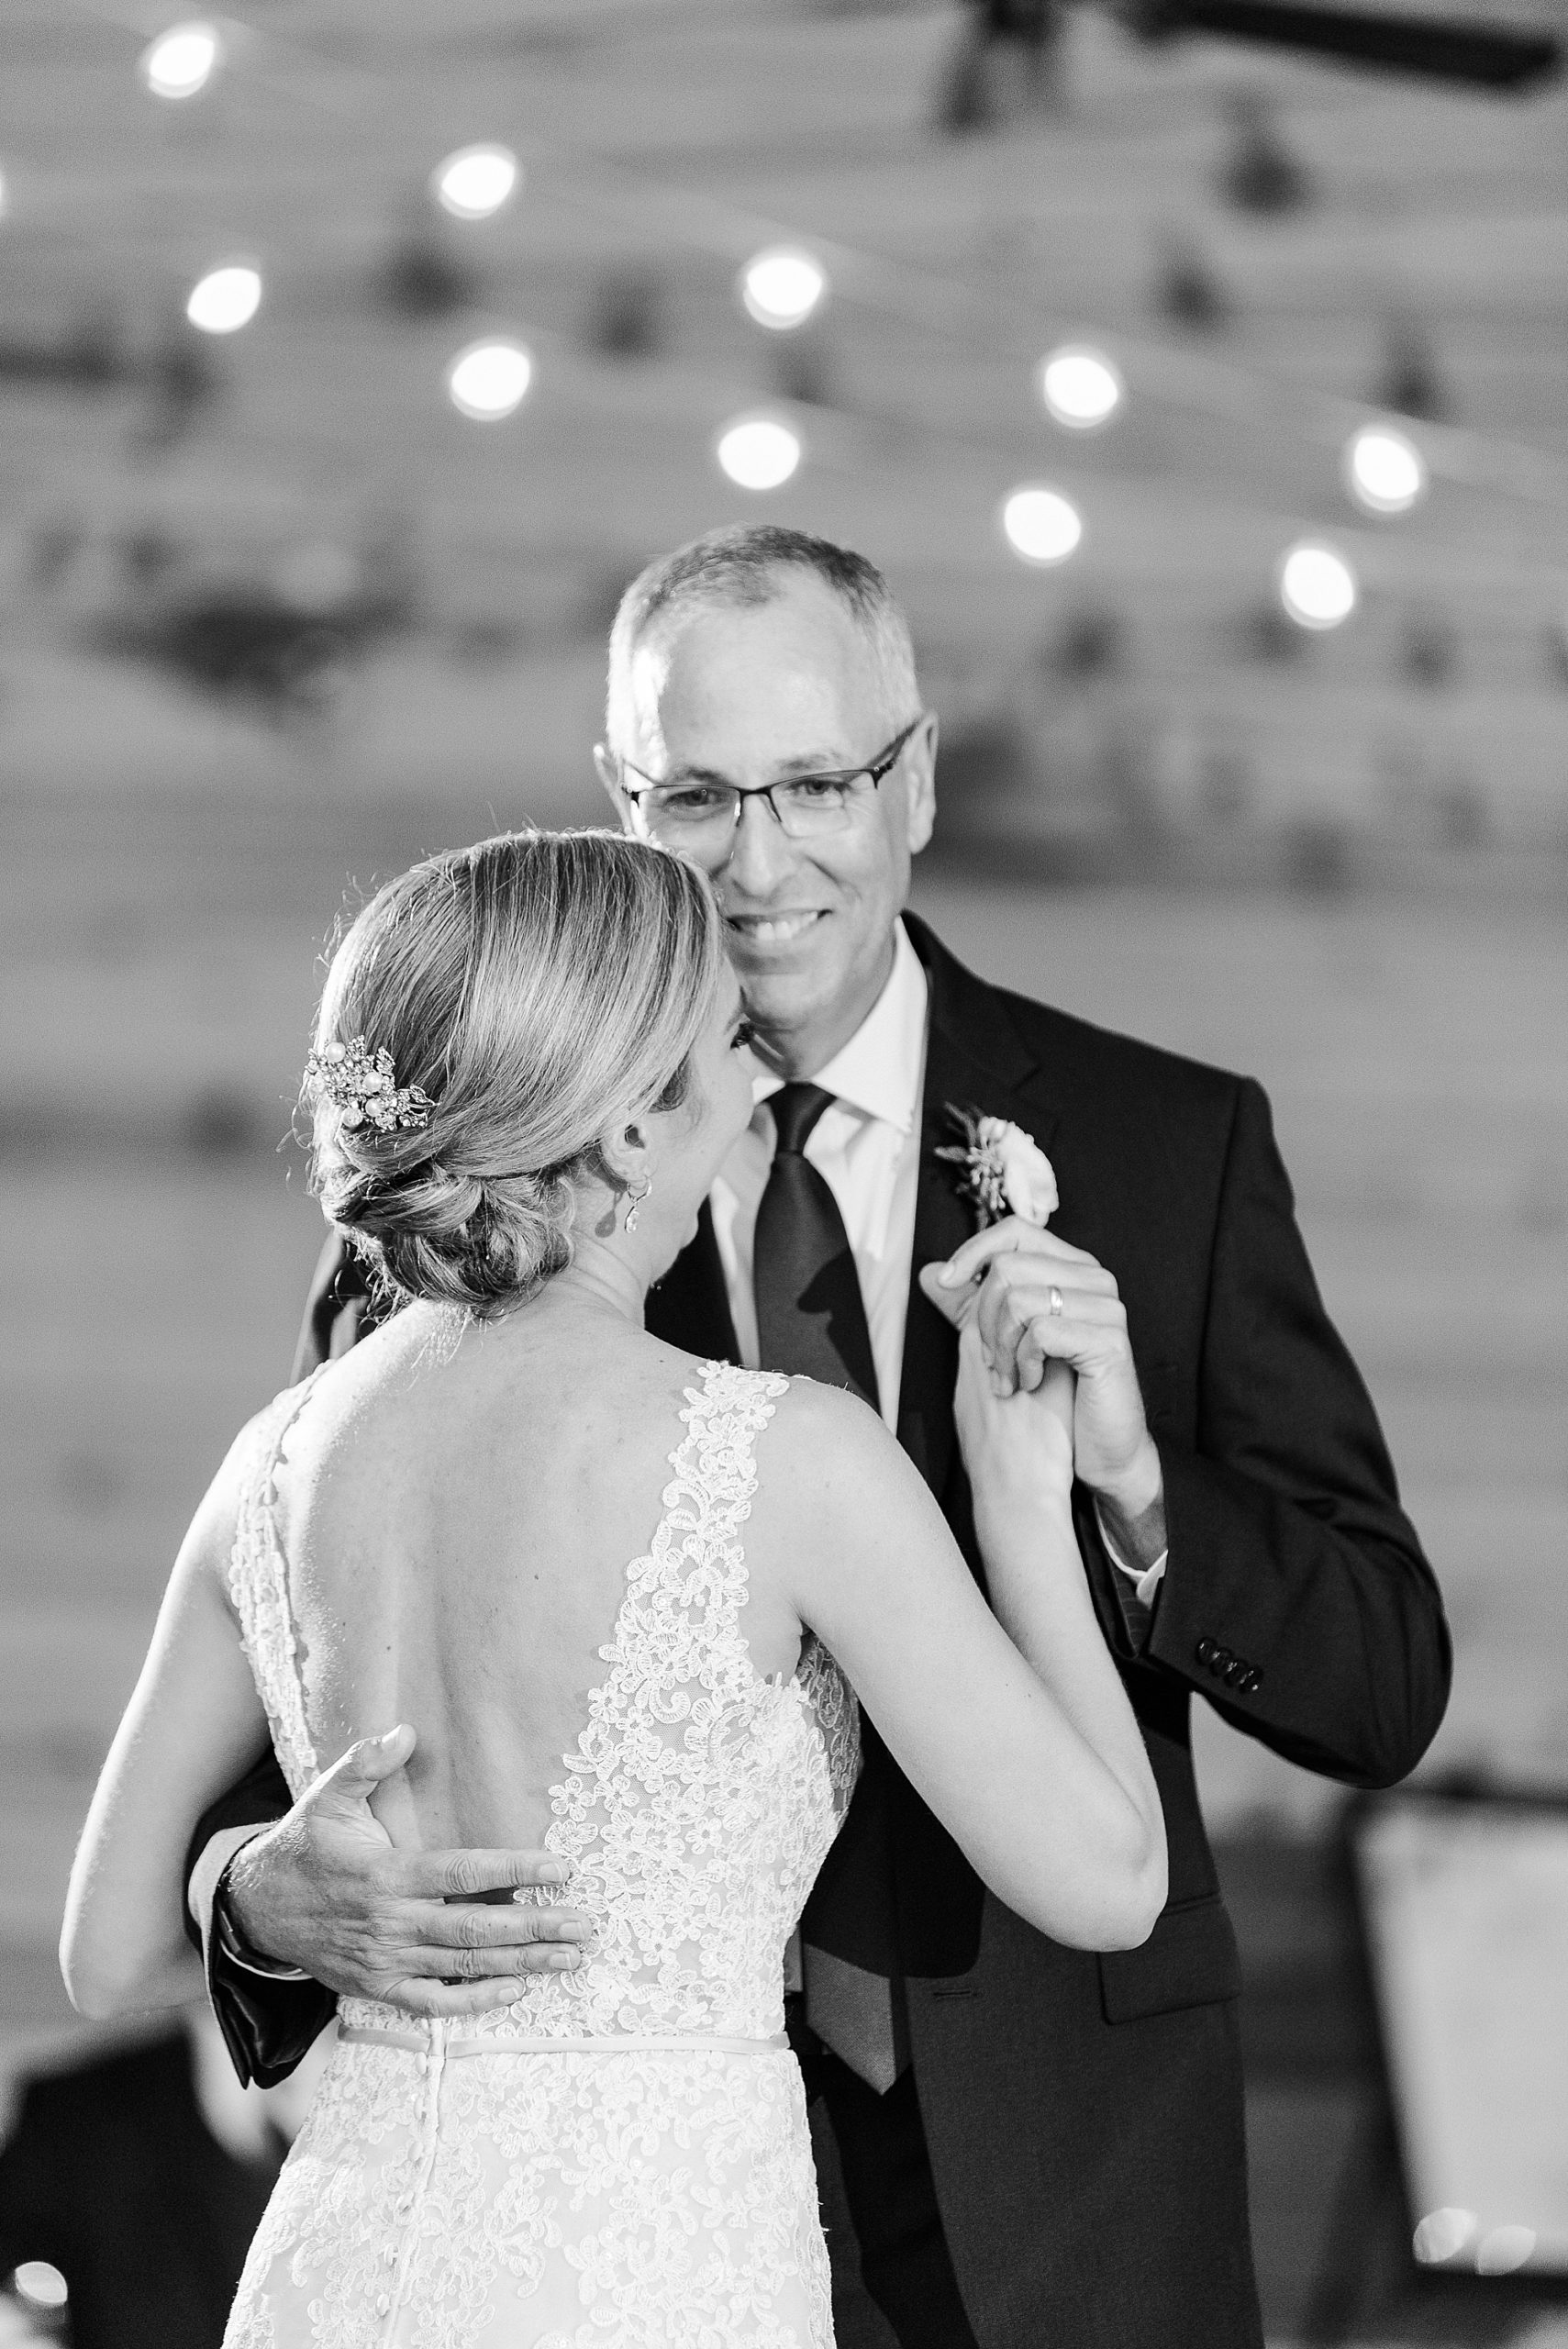 dad and bride dance together at wedding reception